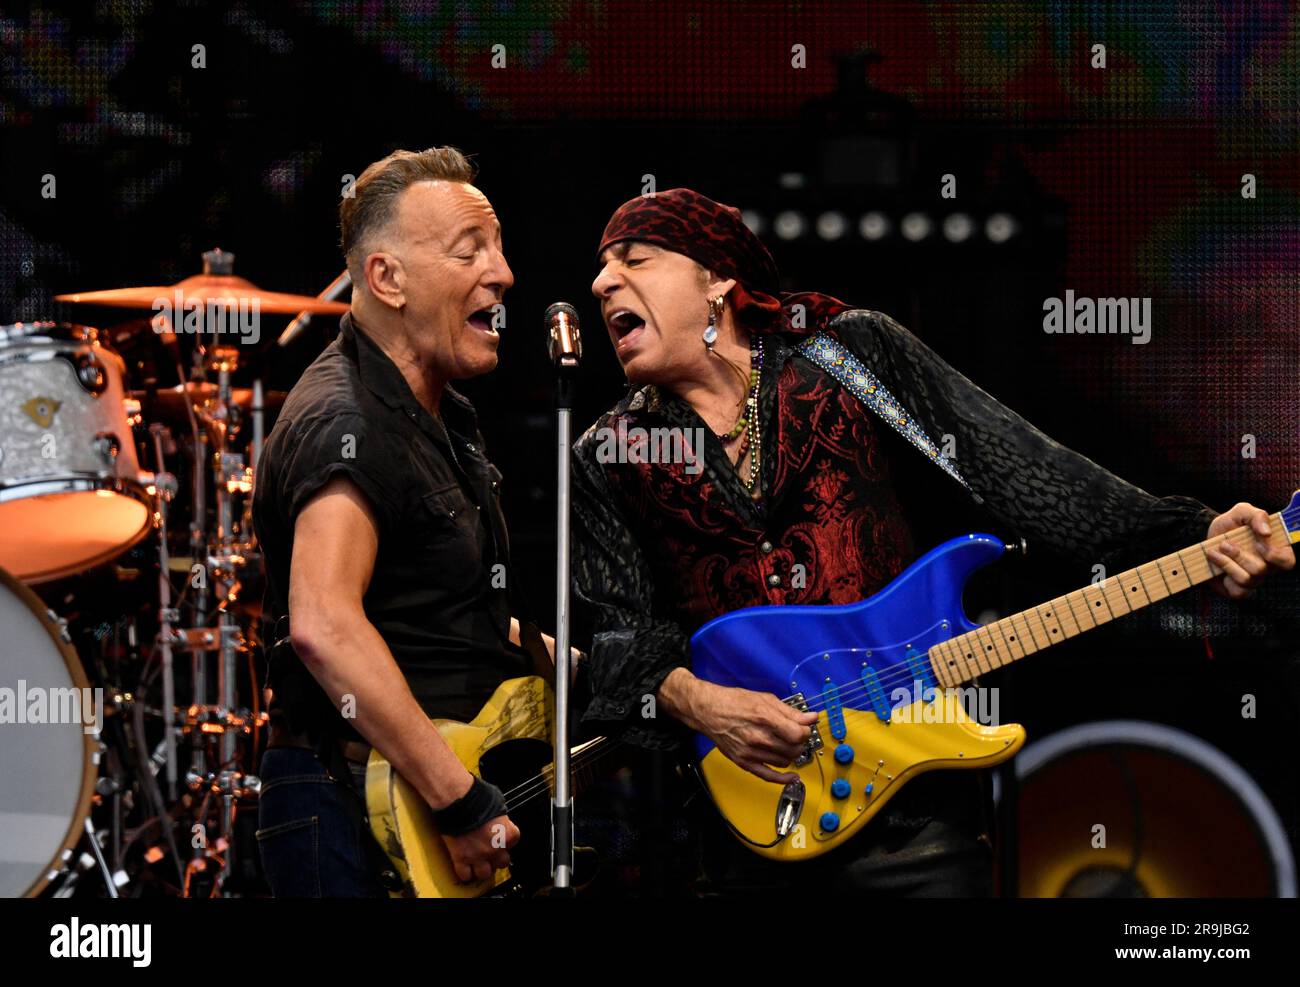 Bruce Springsteen and Steven Van Zandt, also known as 'The Boss' and 'Little Steven', in concert with the E Street Band in Gothenburg, Sweden 26 June Stock Photo